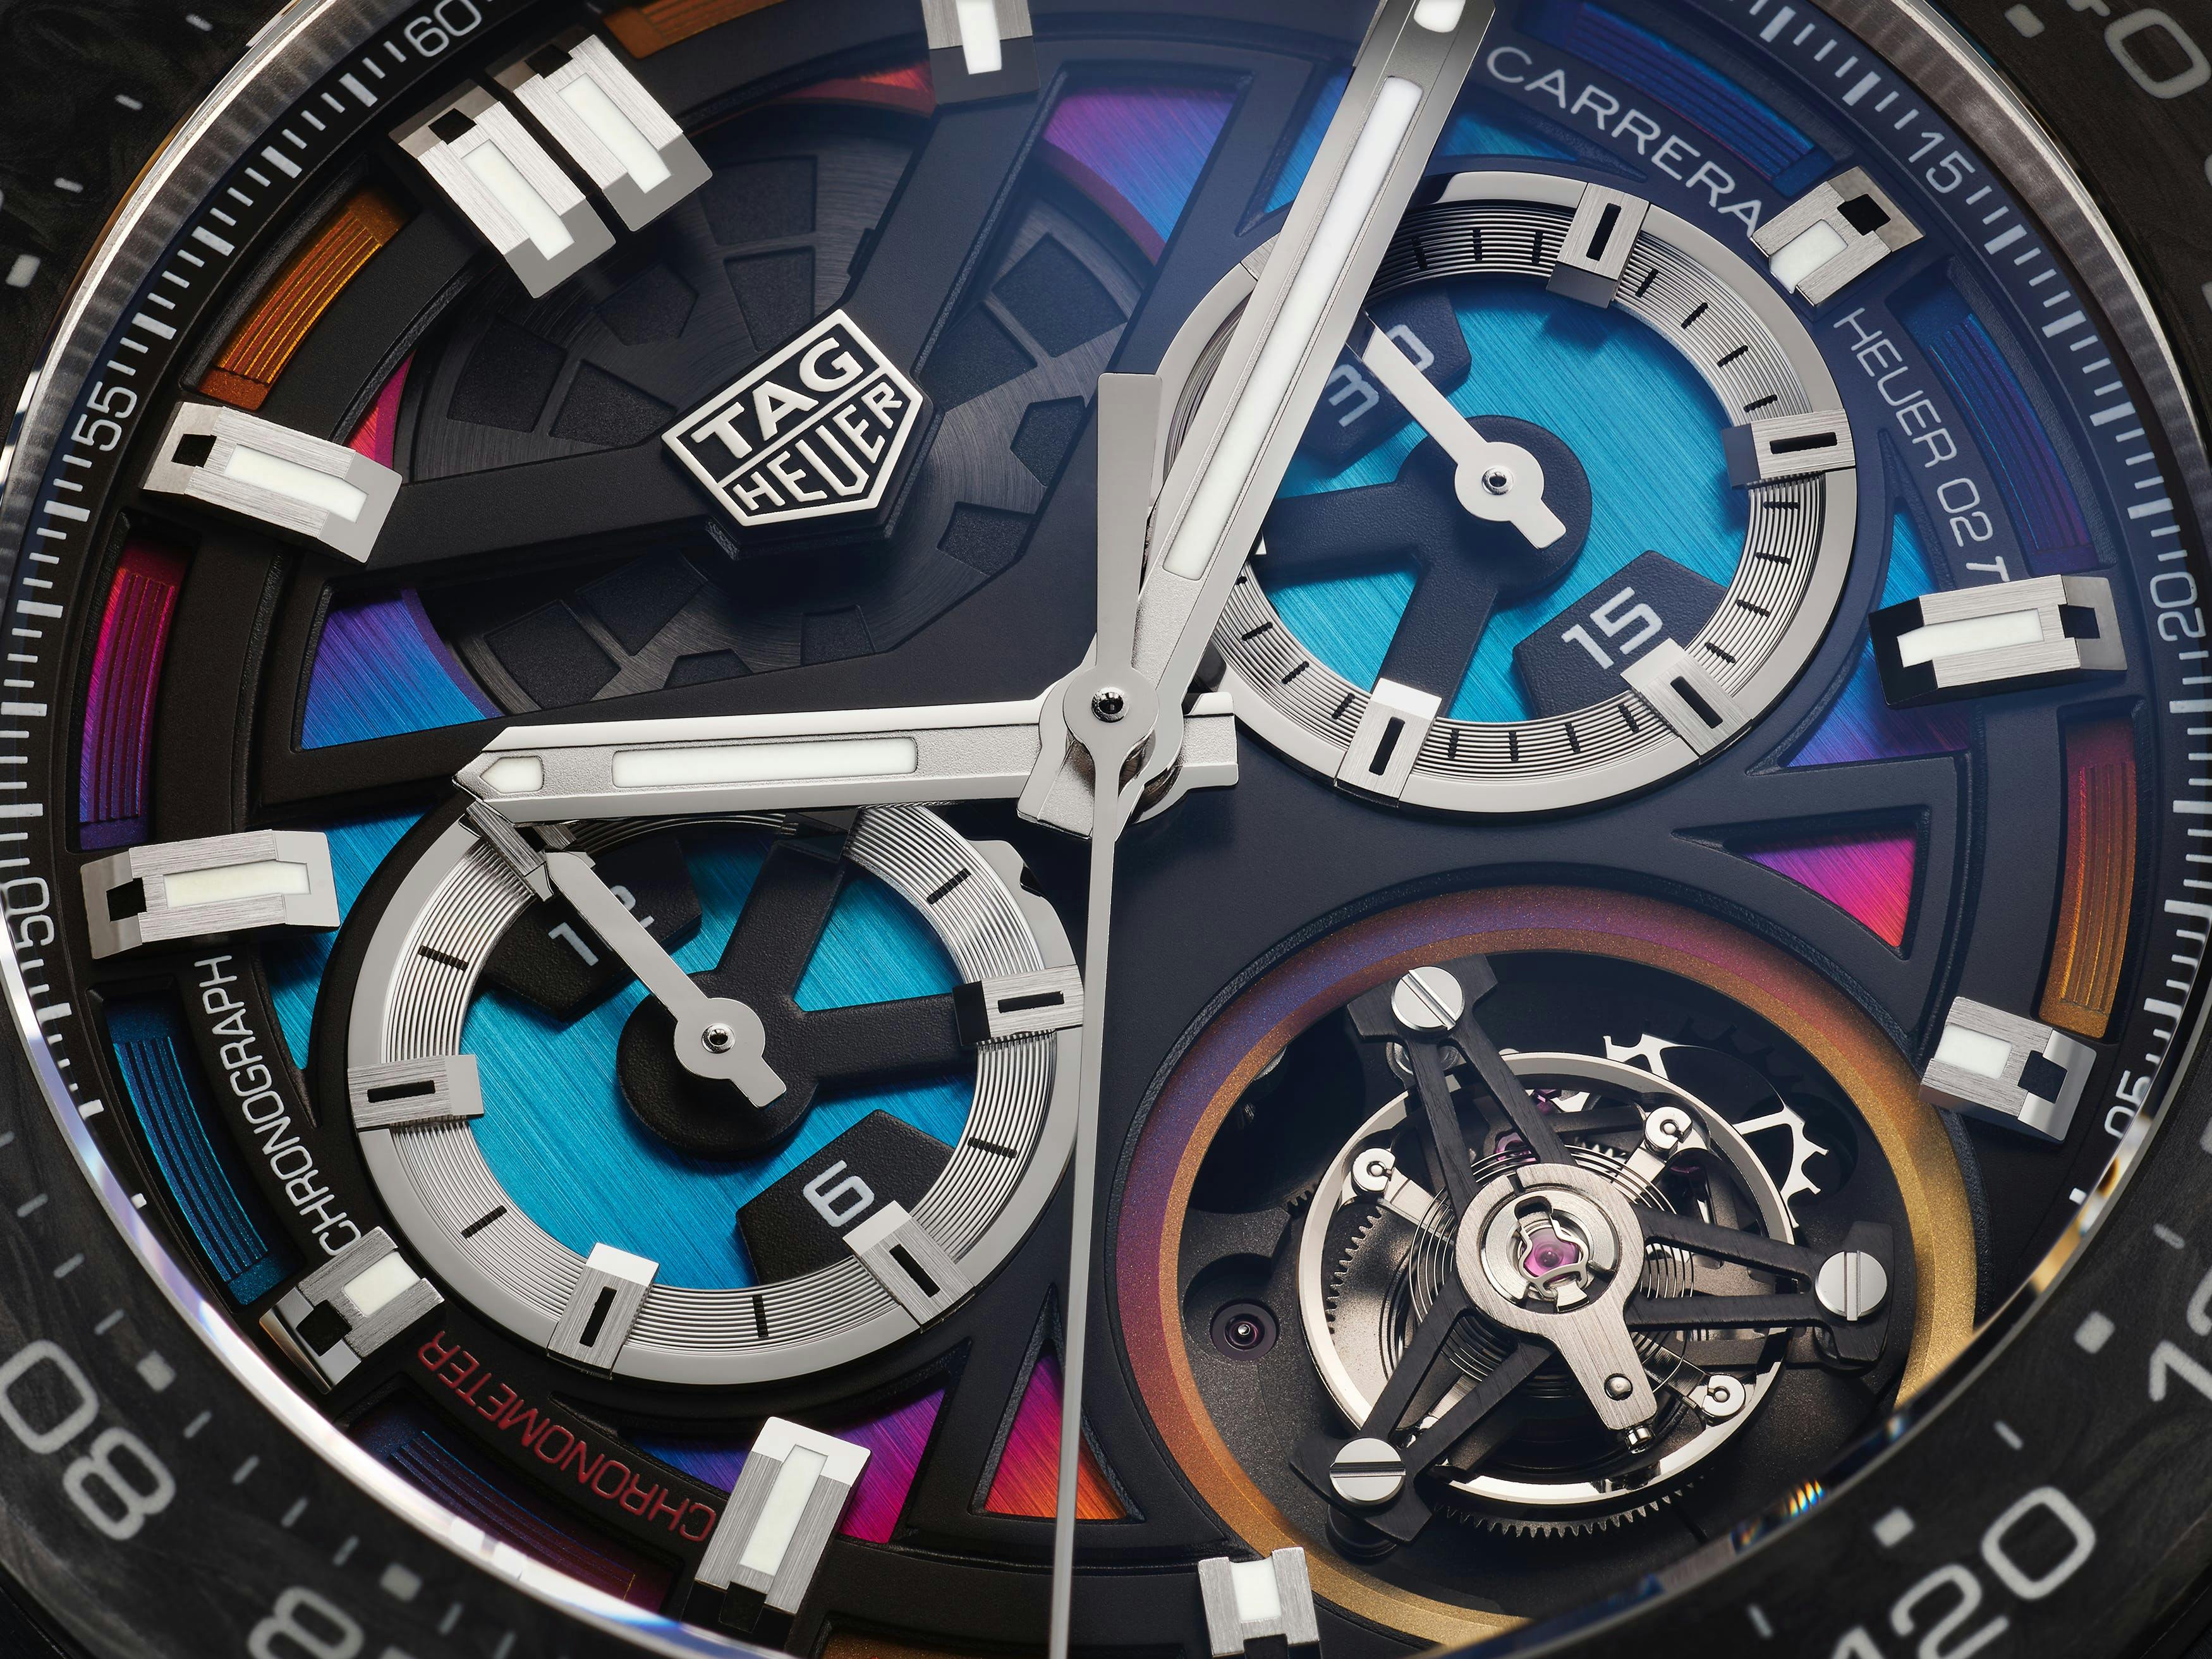 The TAG Heuer Monaco welcomes a new limited-edition timepiece wit